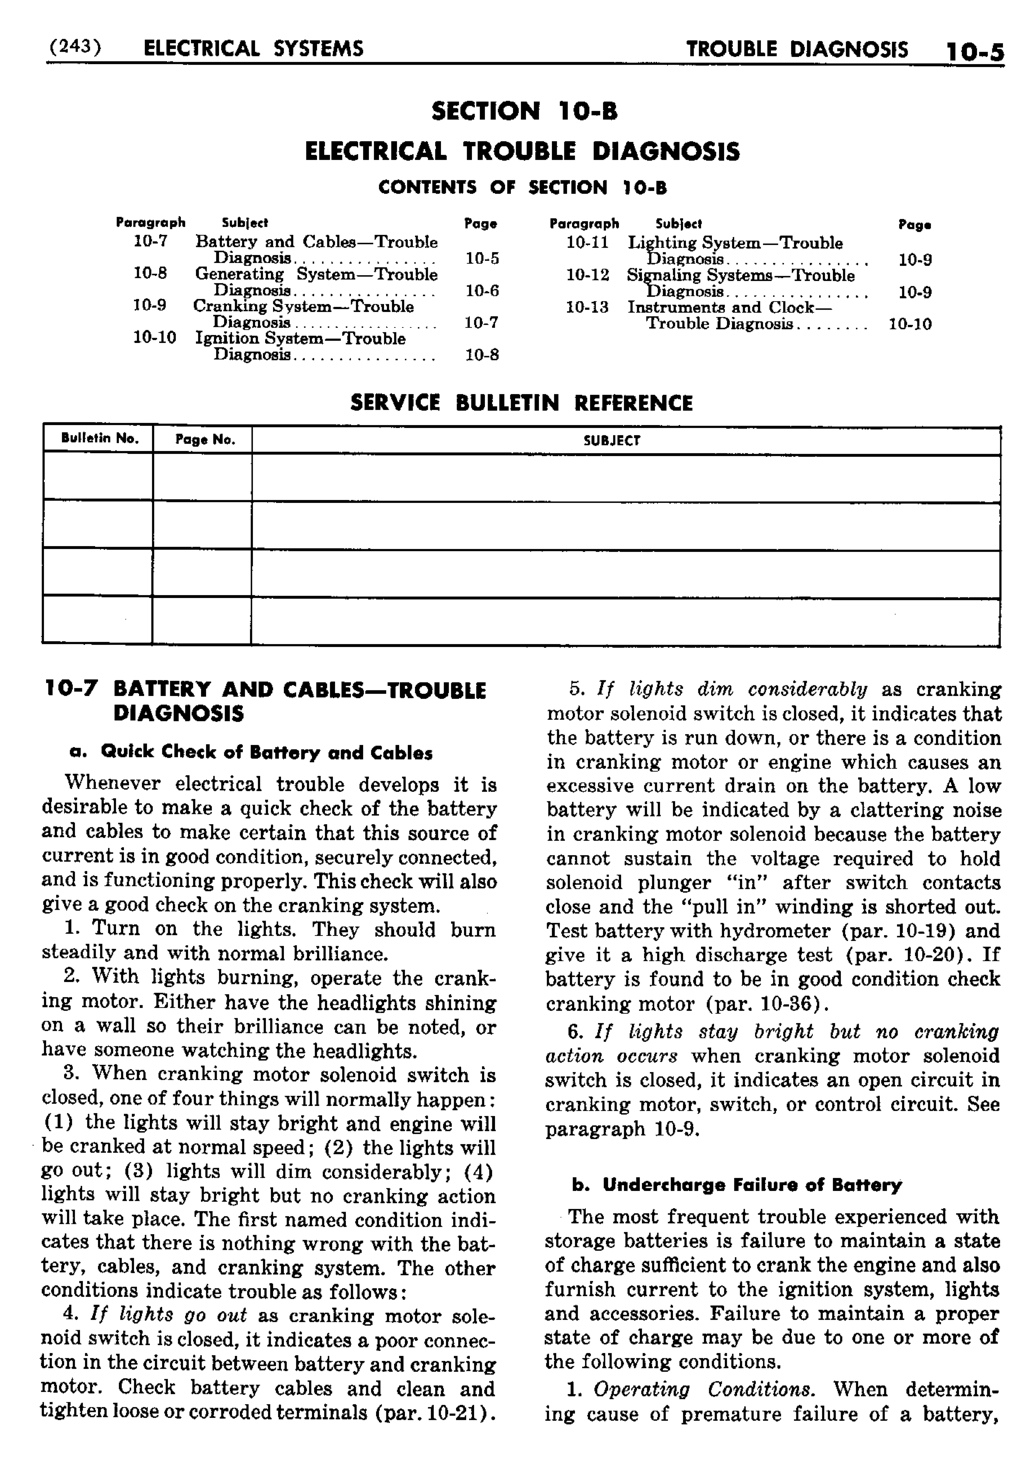 n_11 1950 Buick Shop Manual - Electrical Systems-005-005.jpg